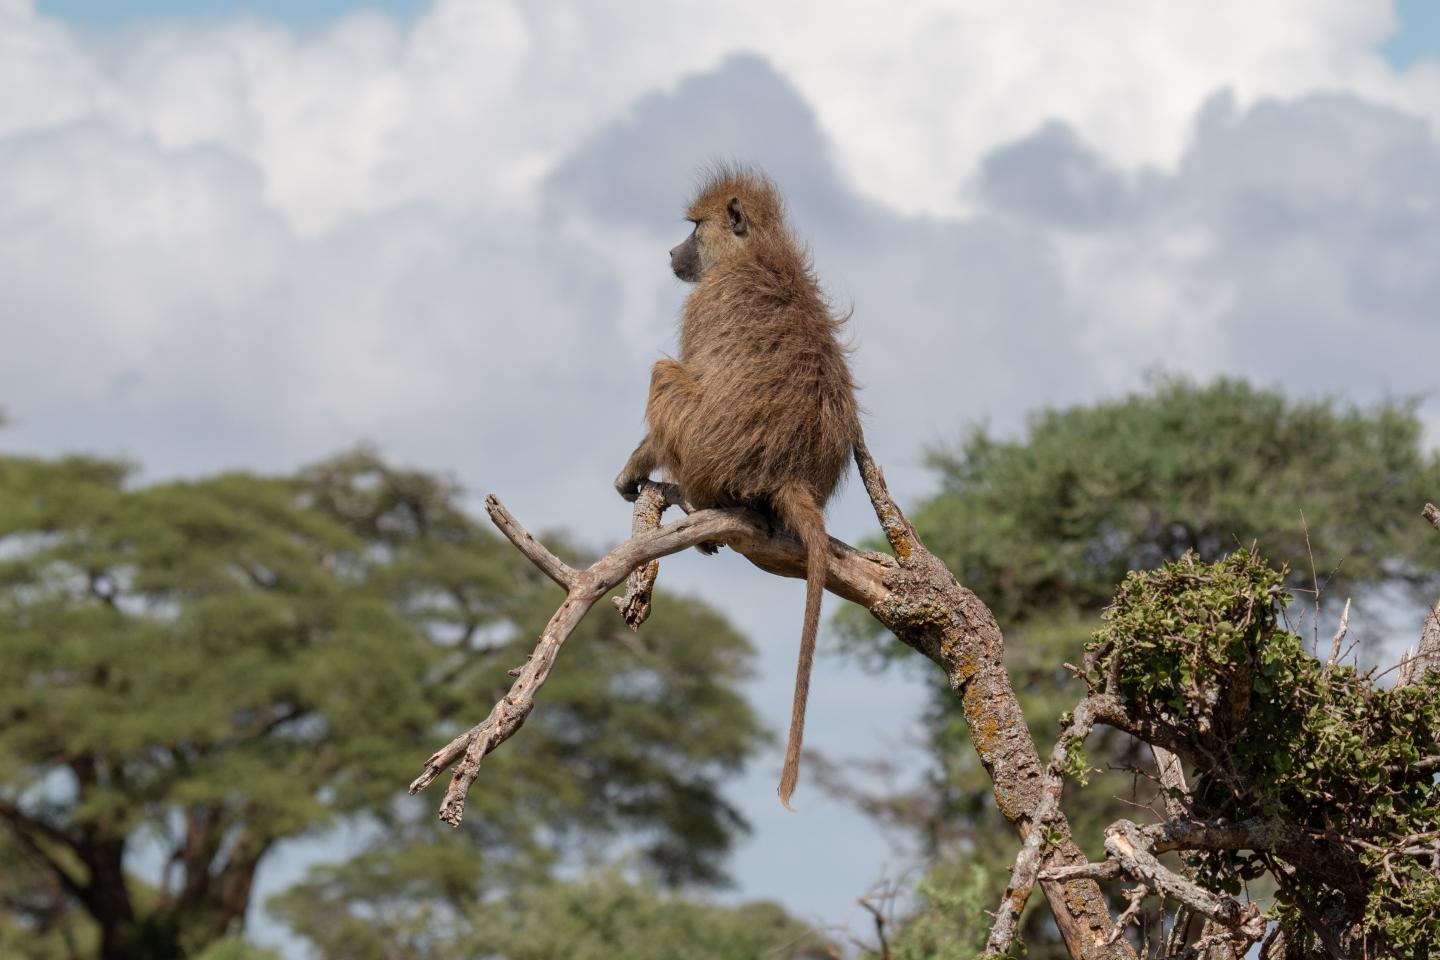 Baboon sits on a tree branch in Kenya.